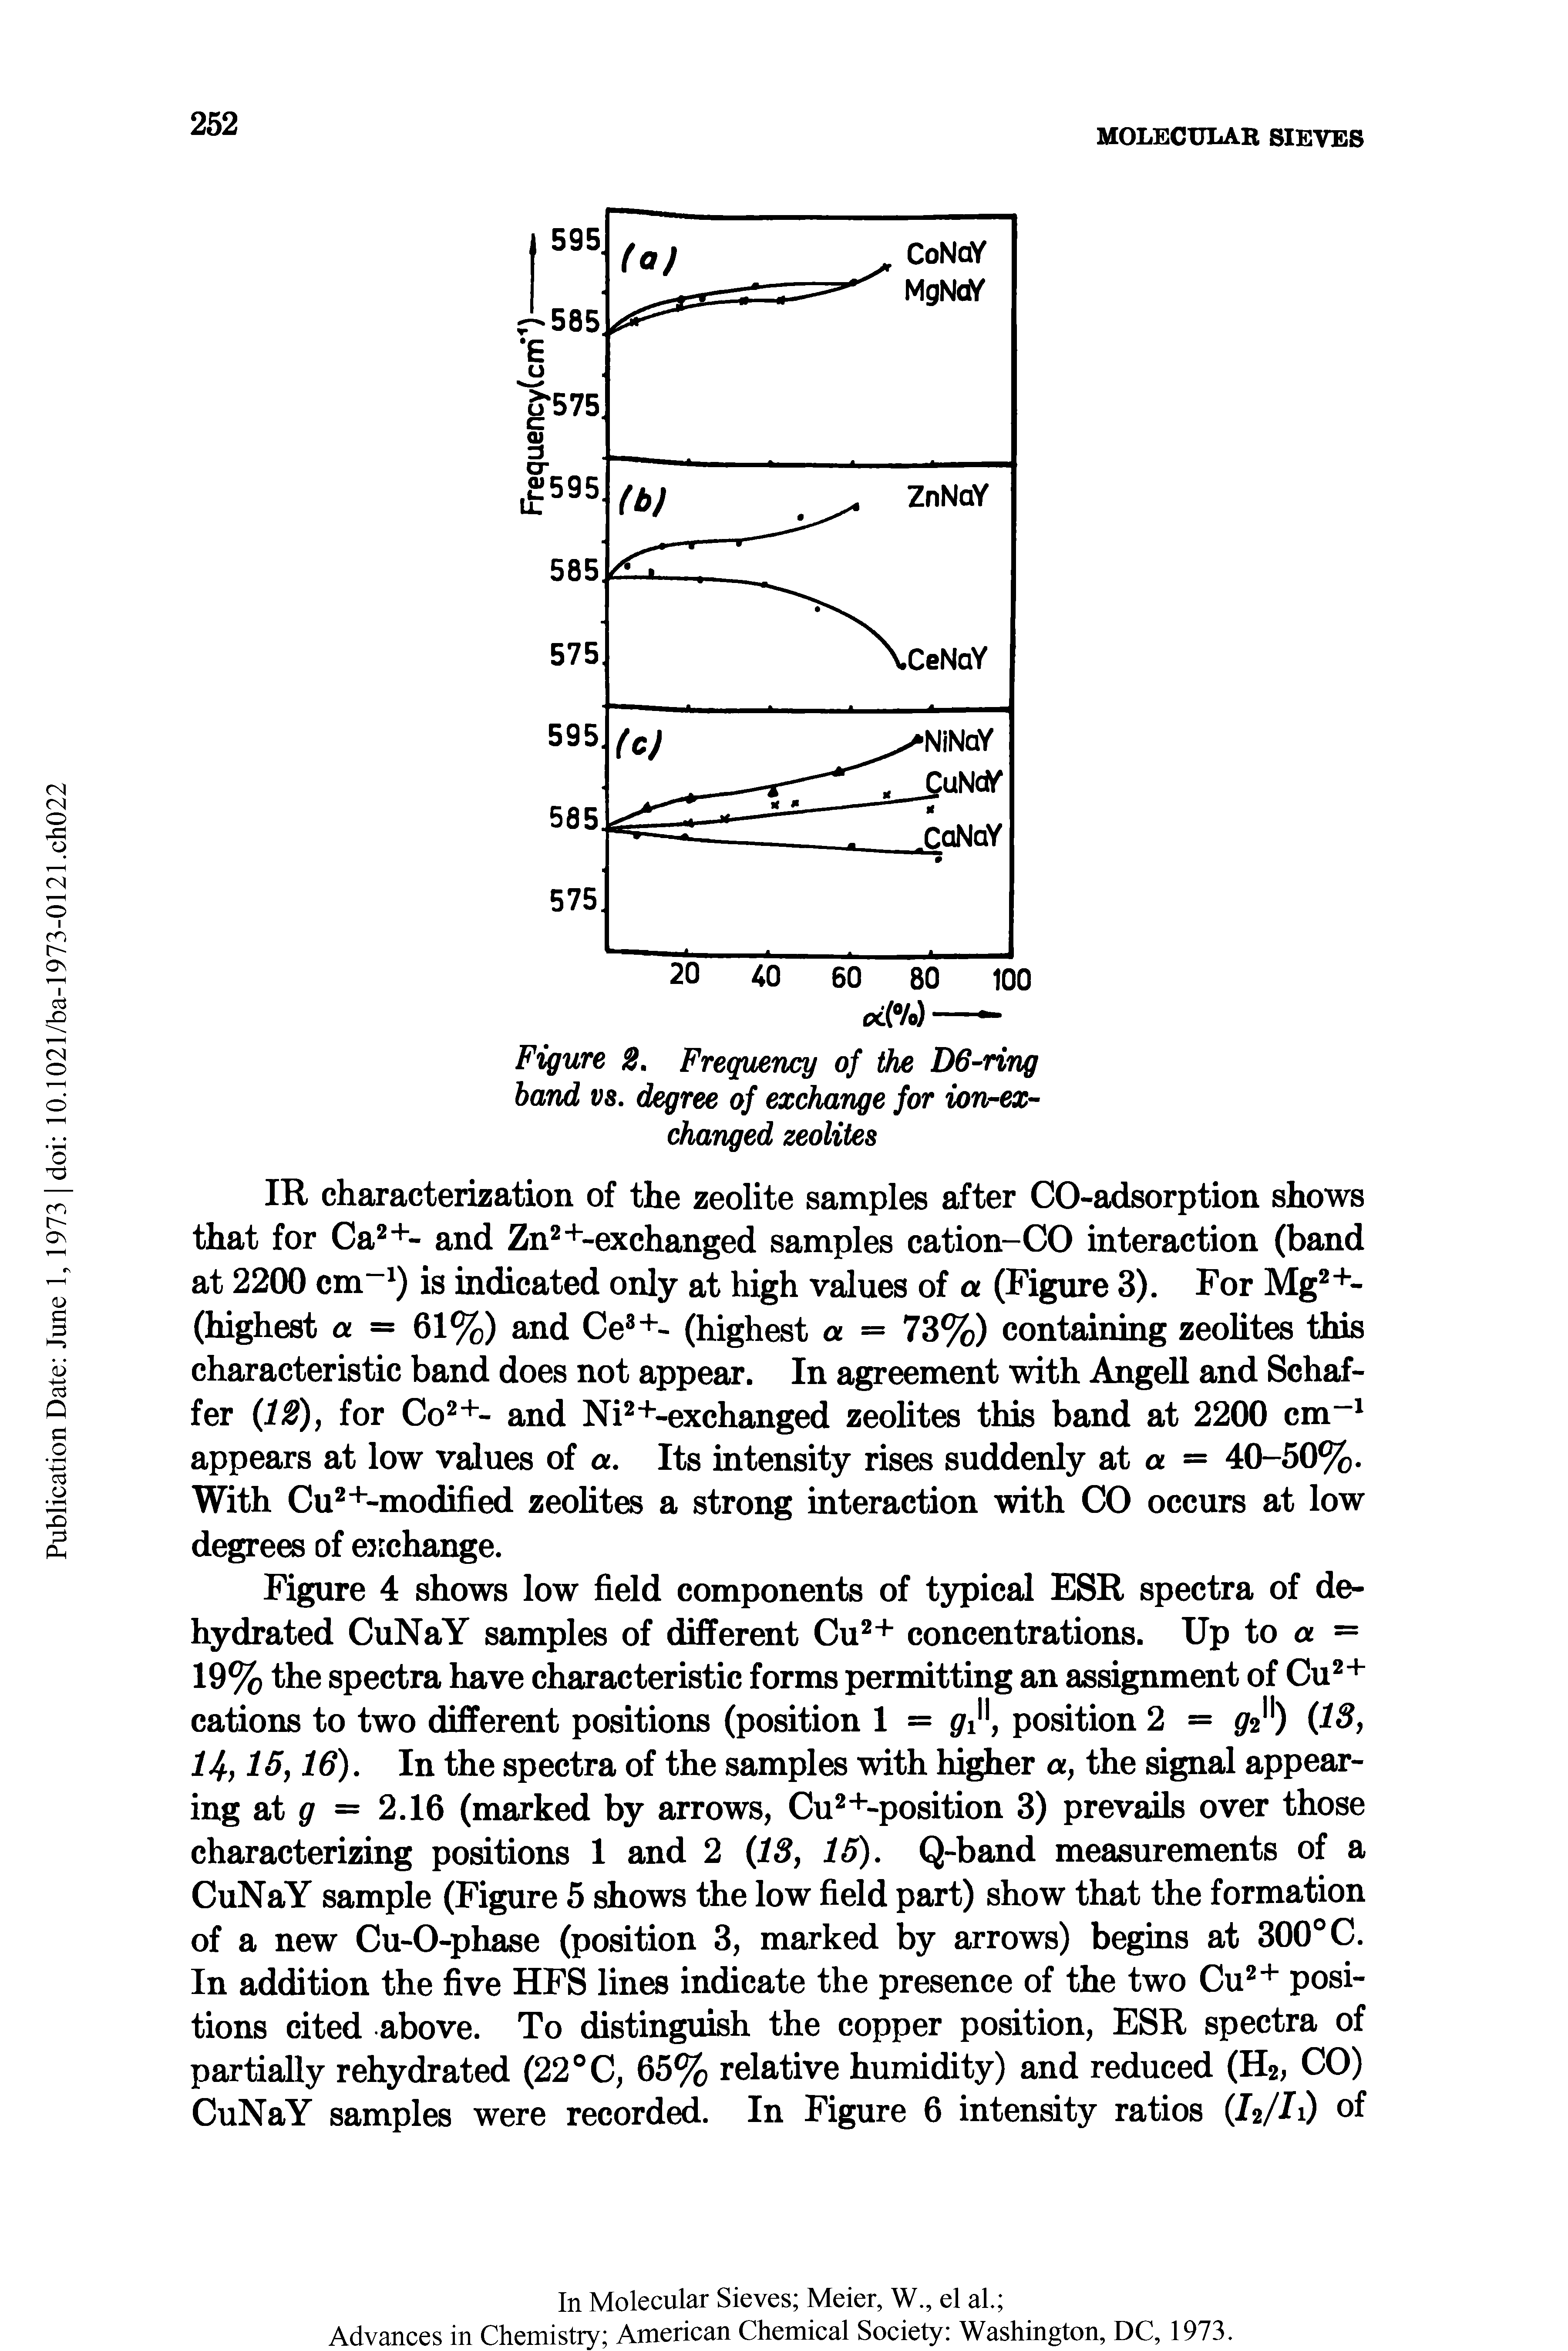 Figure 2. Frequency of the D6-ring band vs. degree of exchange for ion-exchanged zeolites...